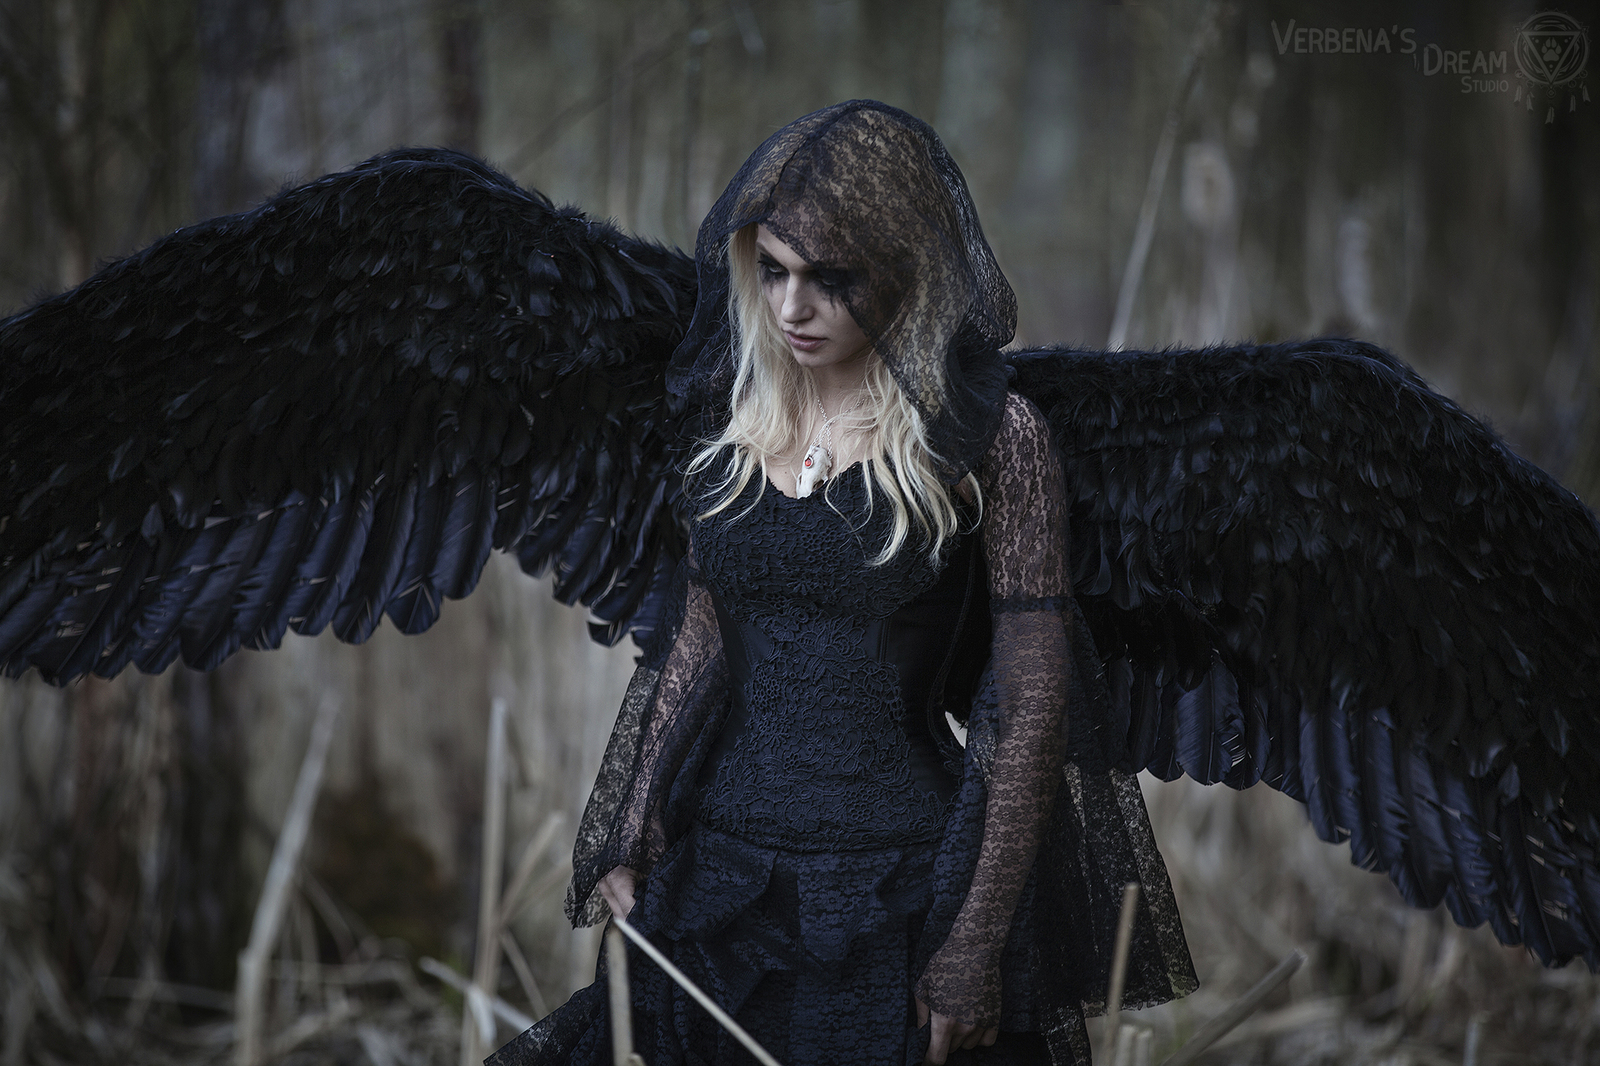 This is actually a post or even picture approximately the Black Angel by Ve...